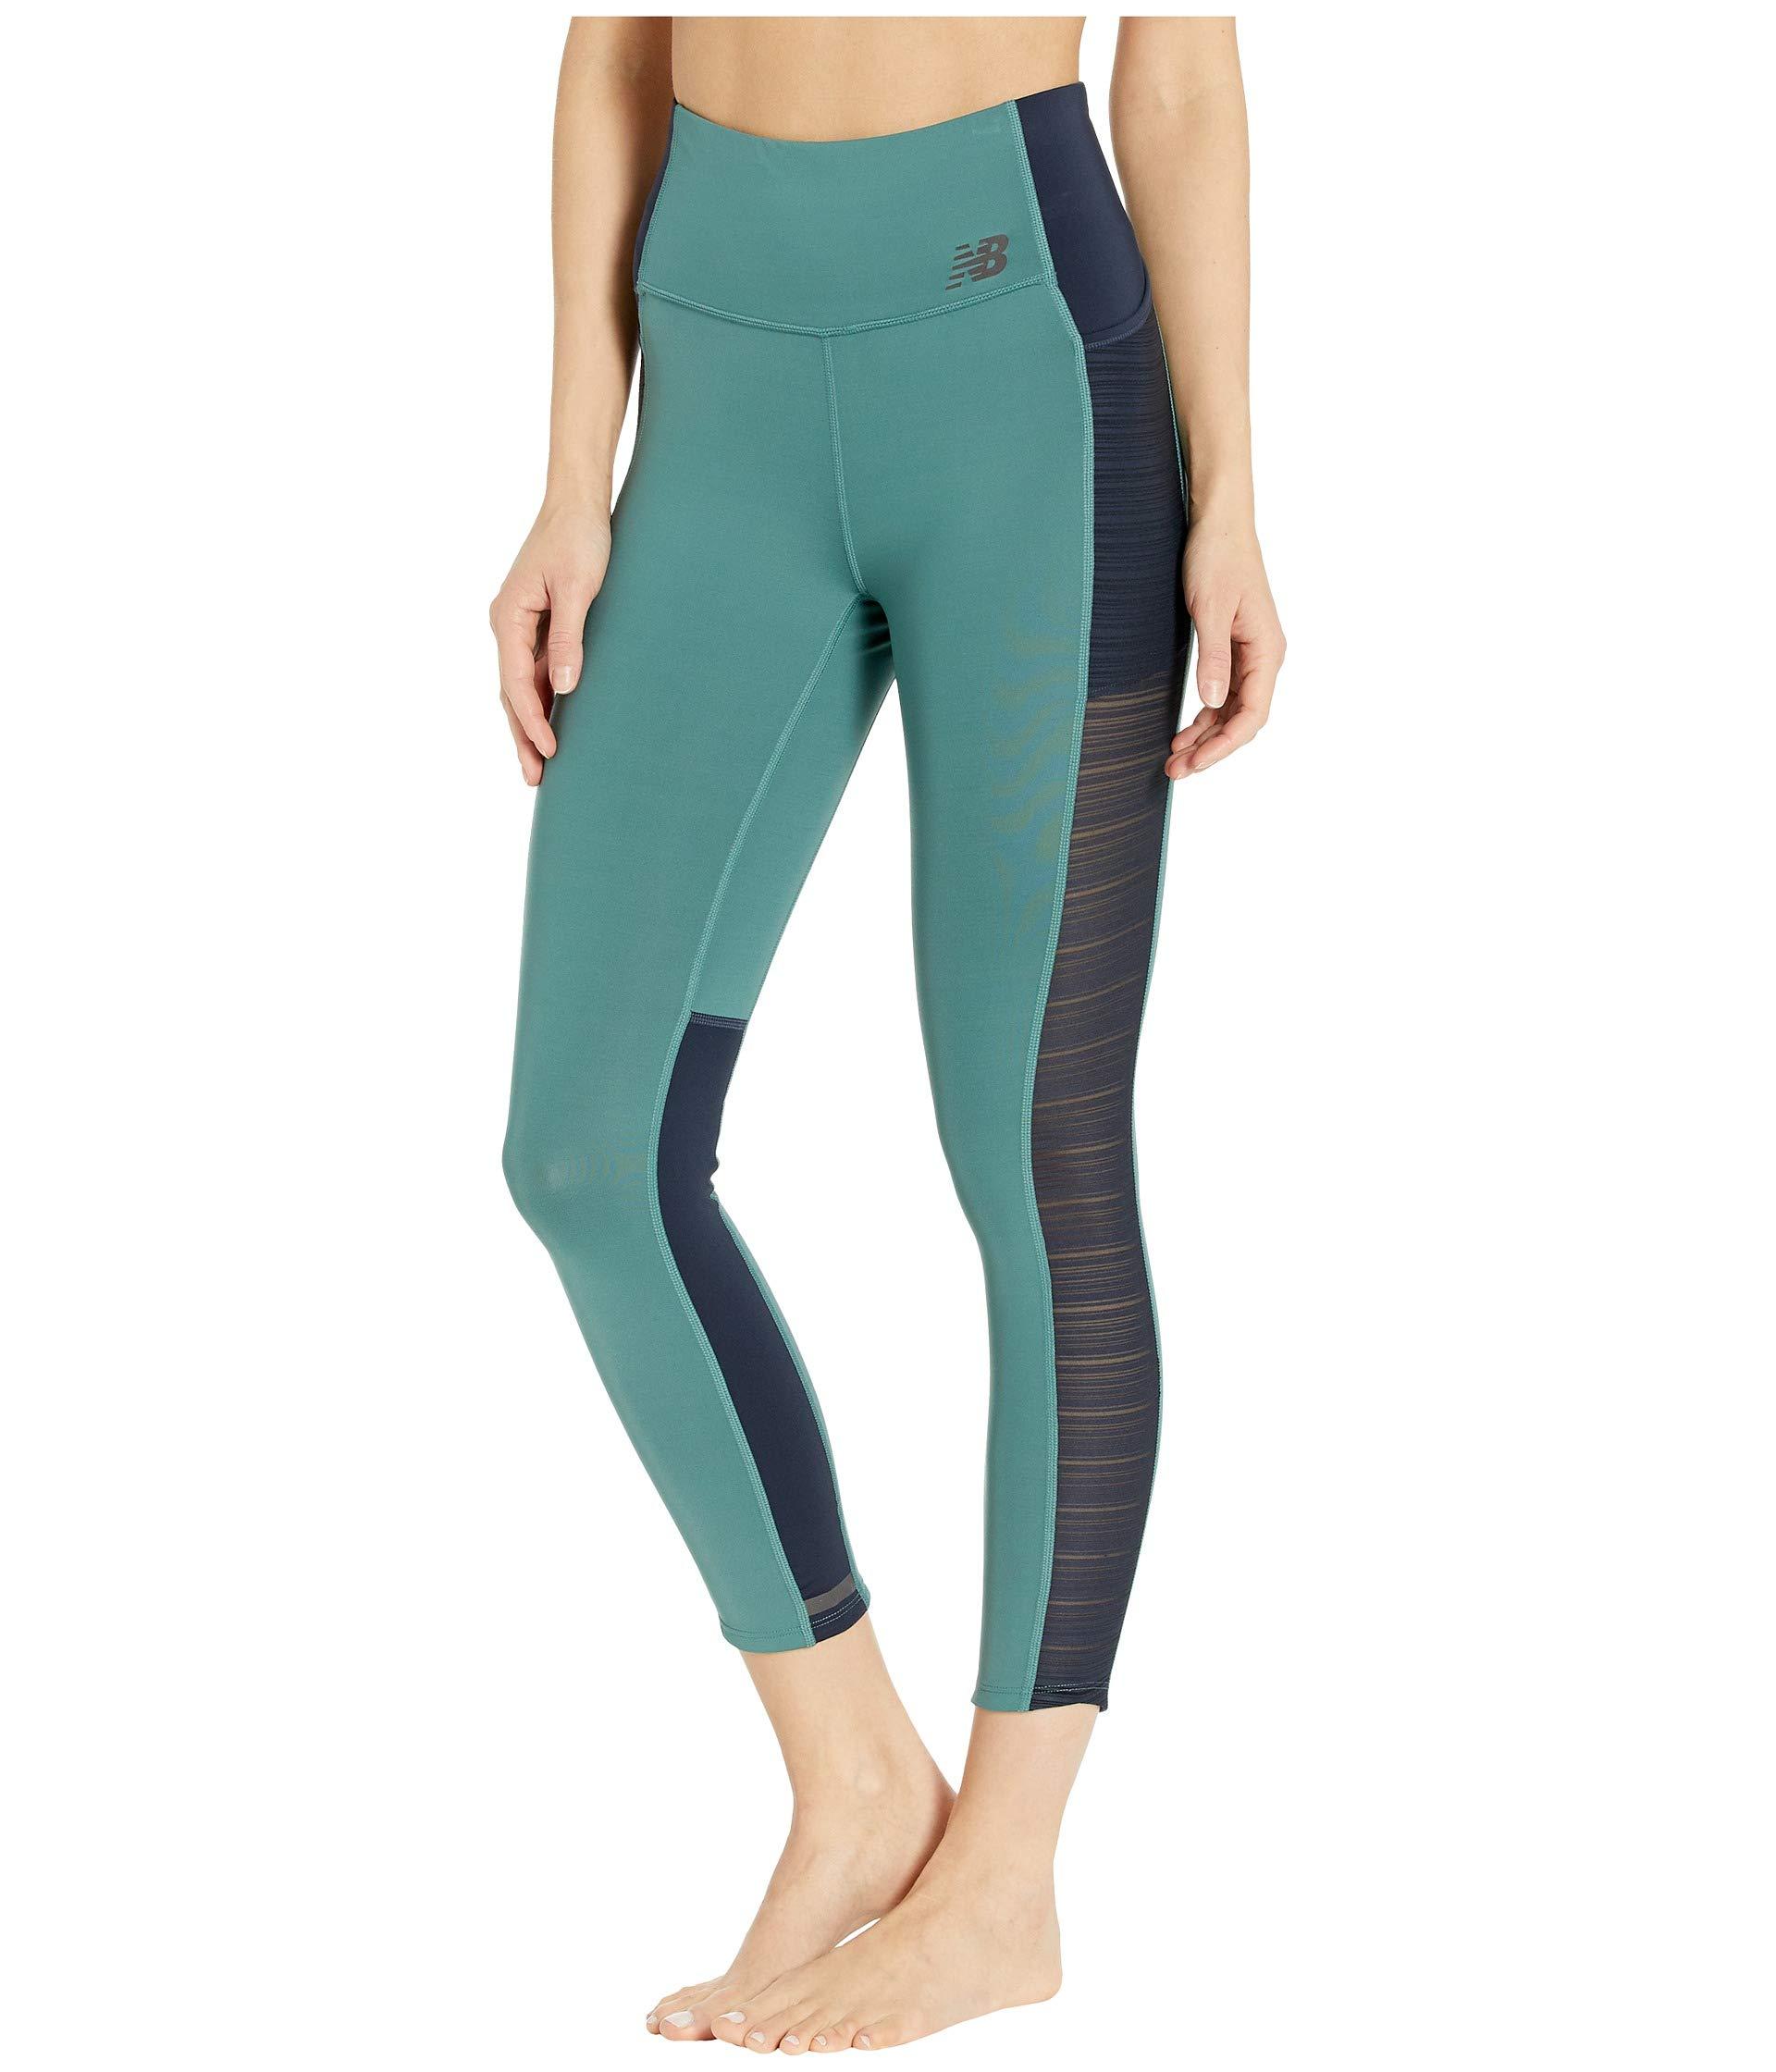 15 Minute New Balance Workout Pants for Beginner